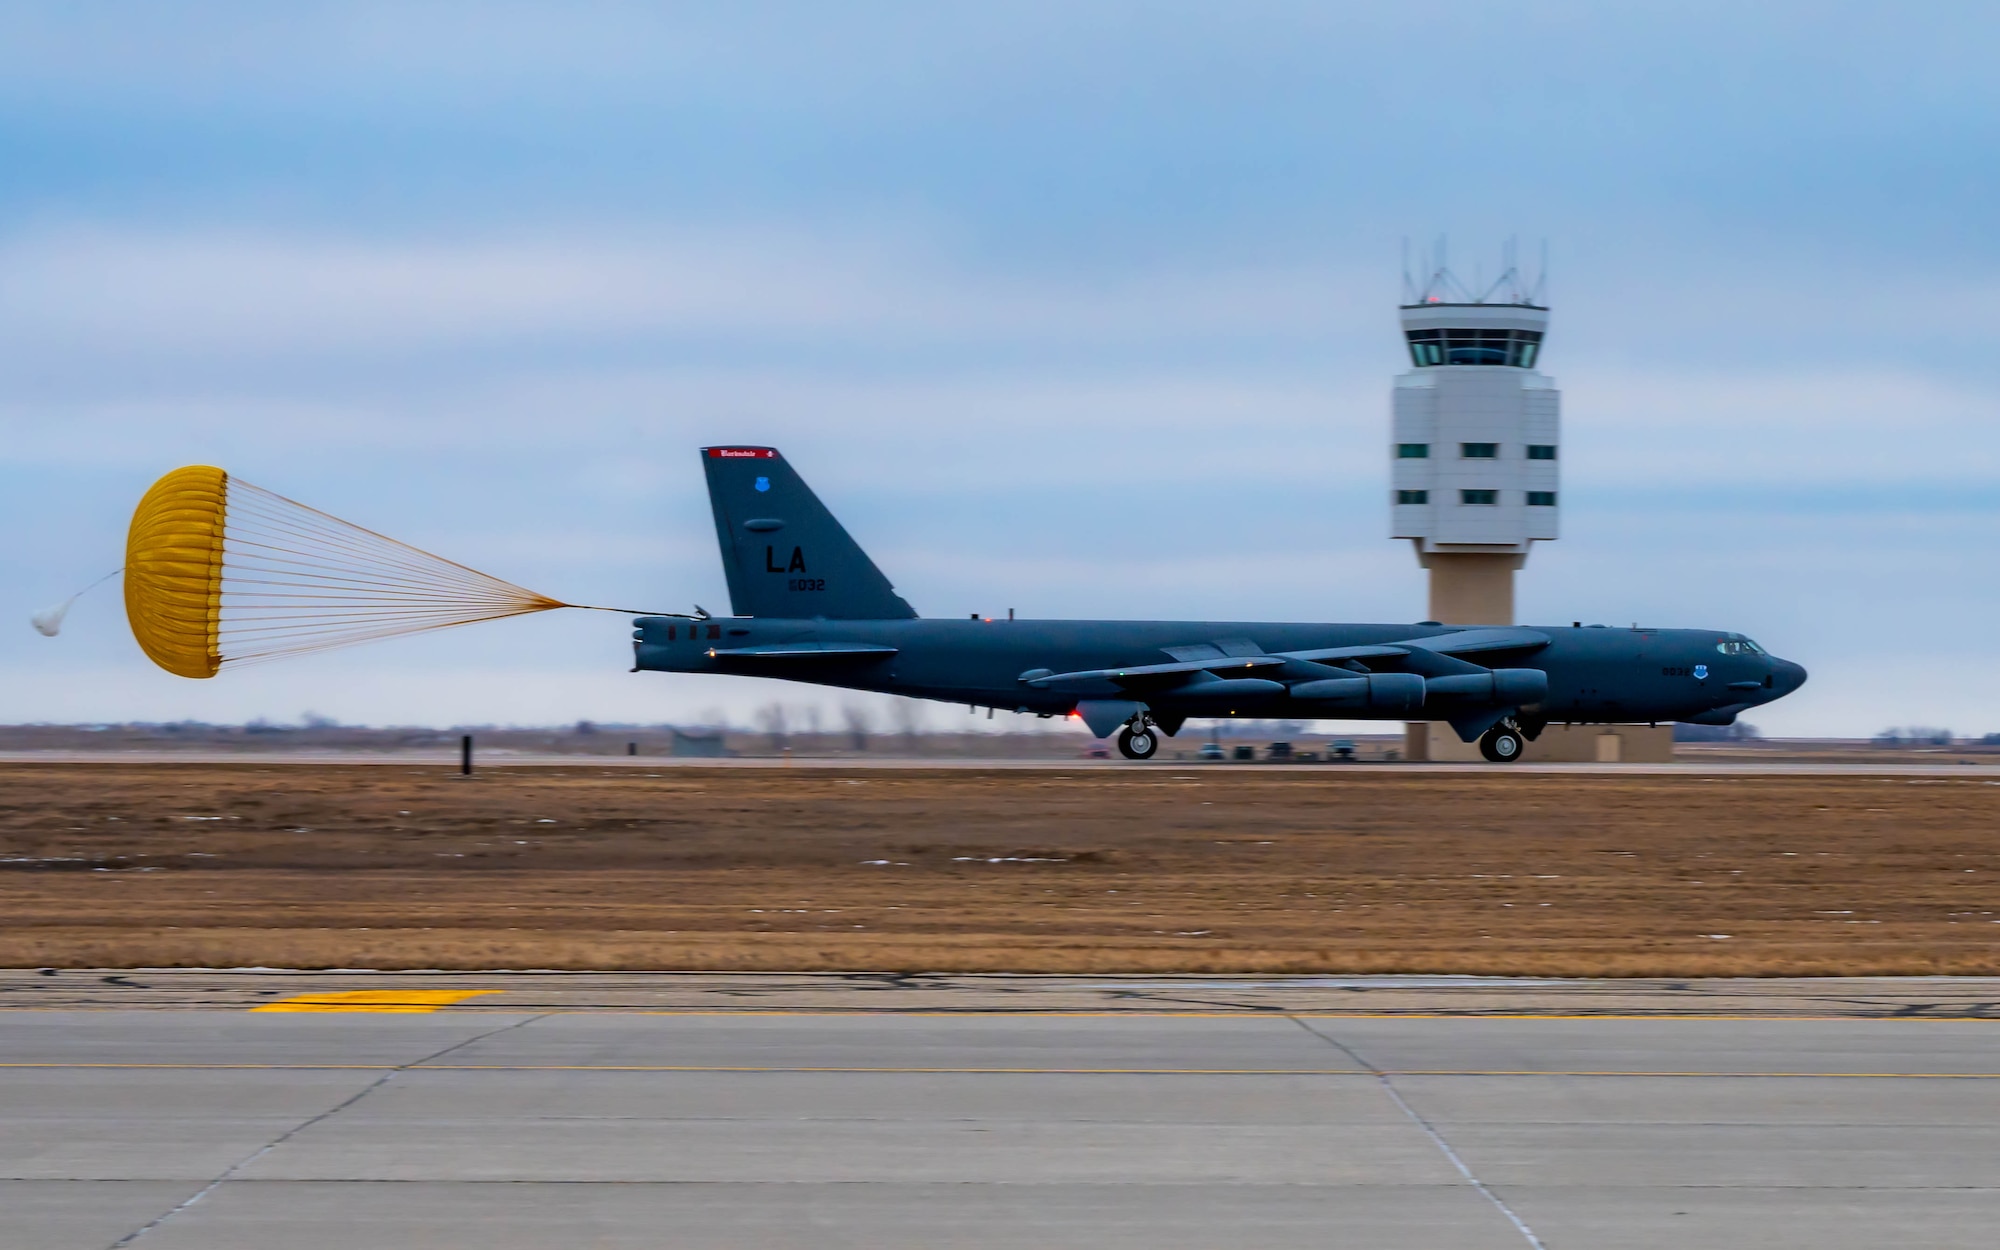 A B-52H Stratofortress assigned to the 96th Bomb Squadron at Barksdale Air Force Base, Louisiana, lands on the flightline in support of Exercise Prairie Vigilance/Bayou Vigilance 24-2 at Minot Air Force Base, North Dakota, Jan. 4, 2024. Air Force Global Strike Command maintains a credible strategic capability that enhances deterrence of threats to the United States, its allies and partners. (U.S. Air Force photo by Senior Airman Alexander Nottingham)